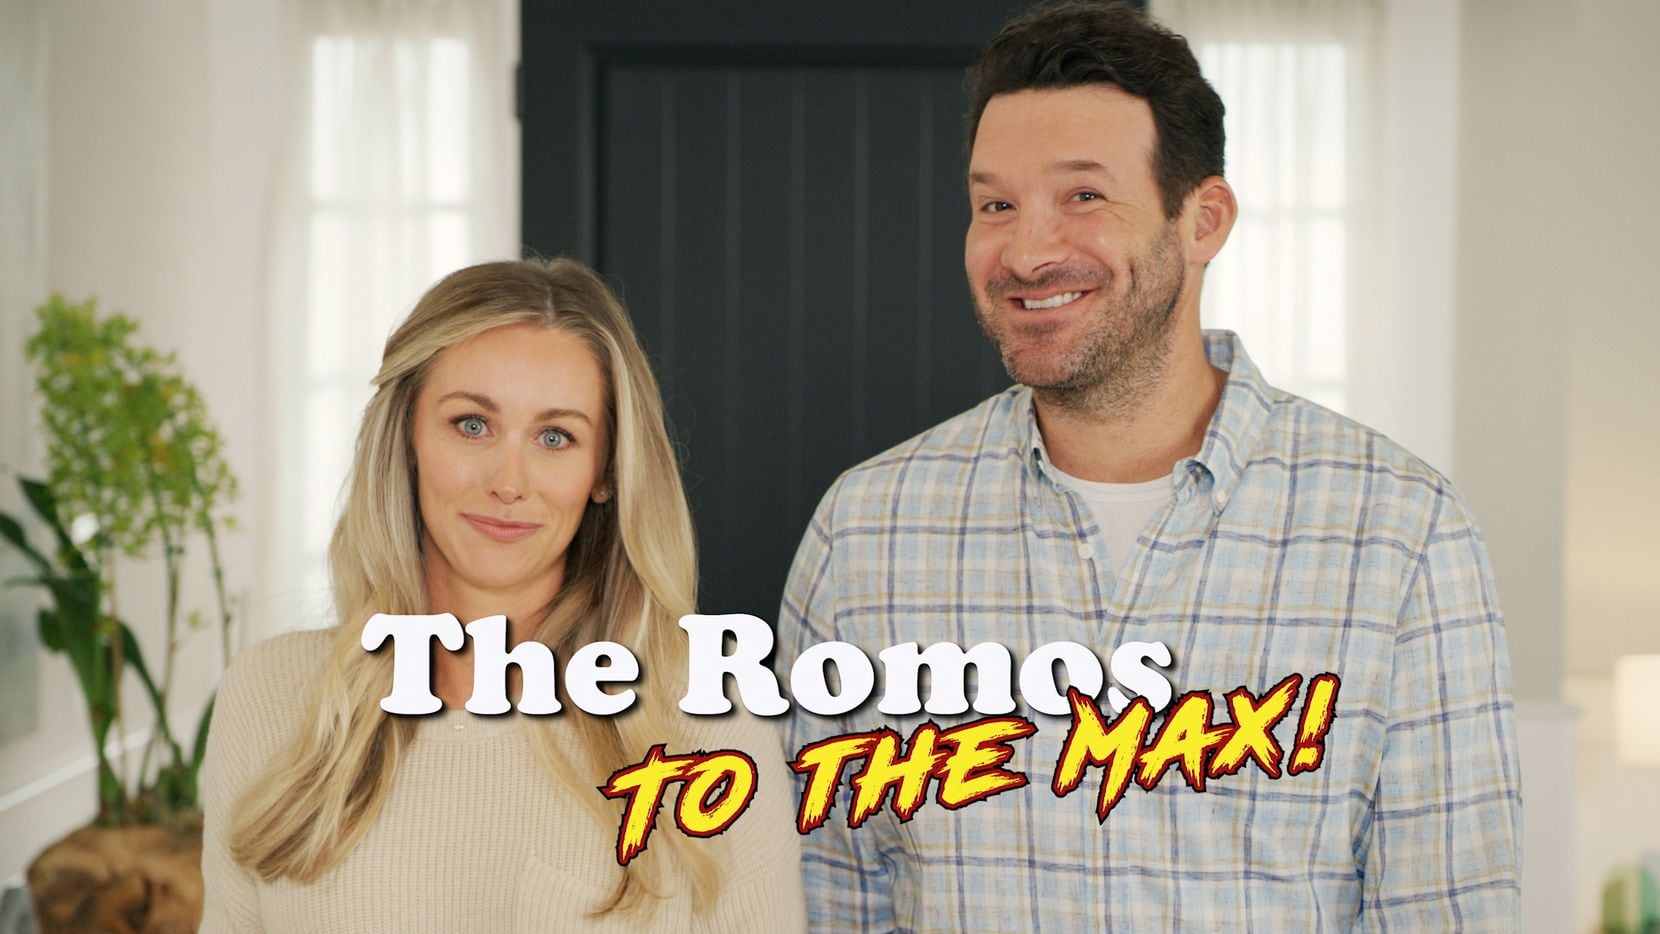 Watch: Tony Romo goes 'to max' in Super Bowl LV